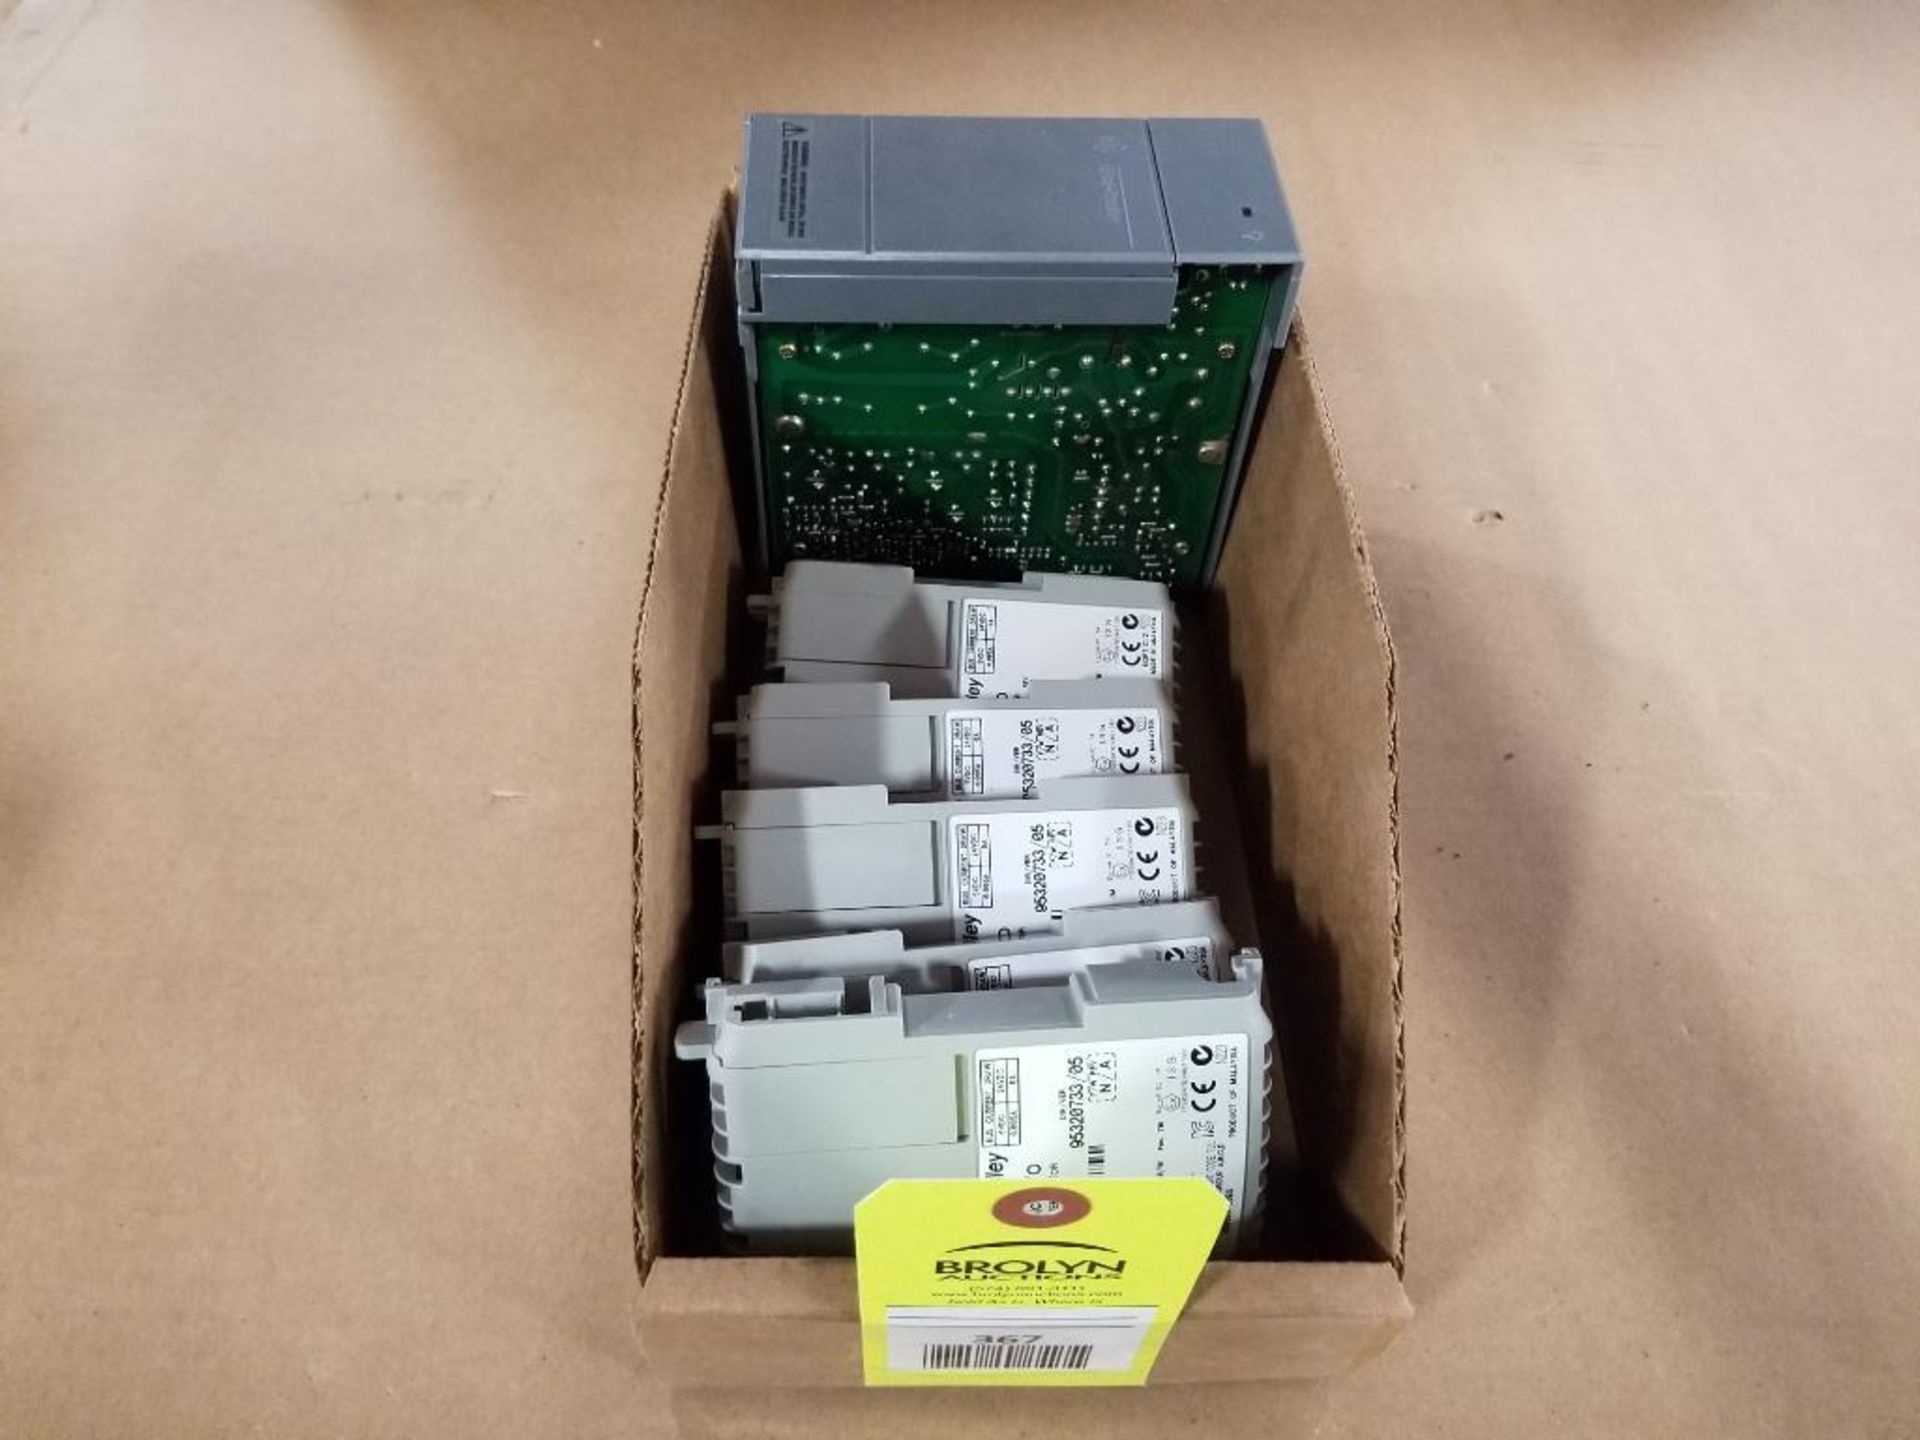 Assorted Allen Bradley I/O modules and power supply.